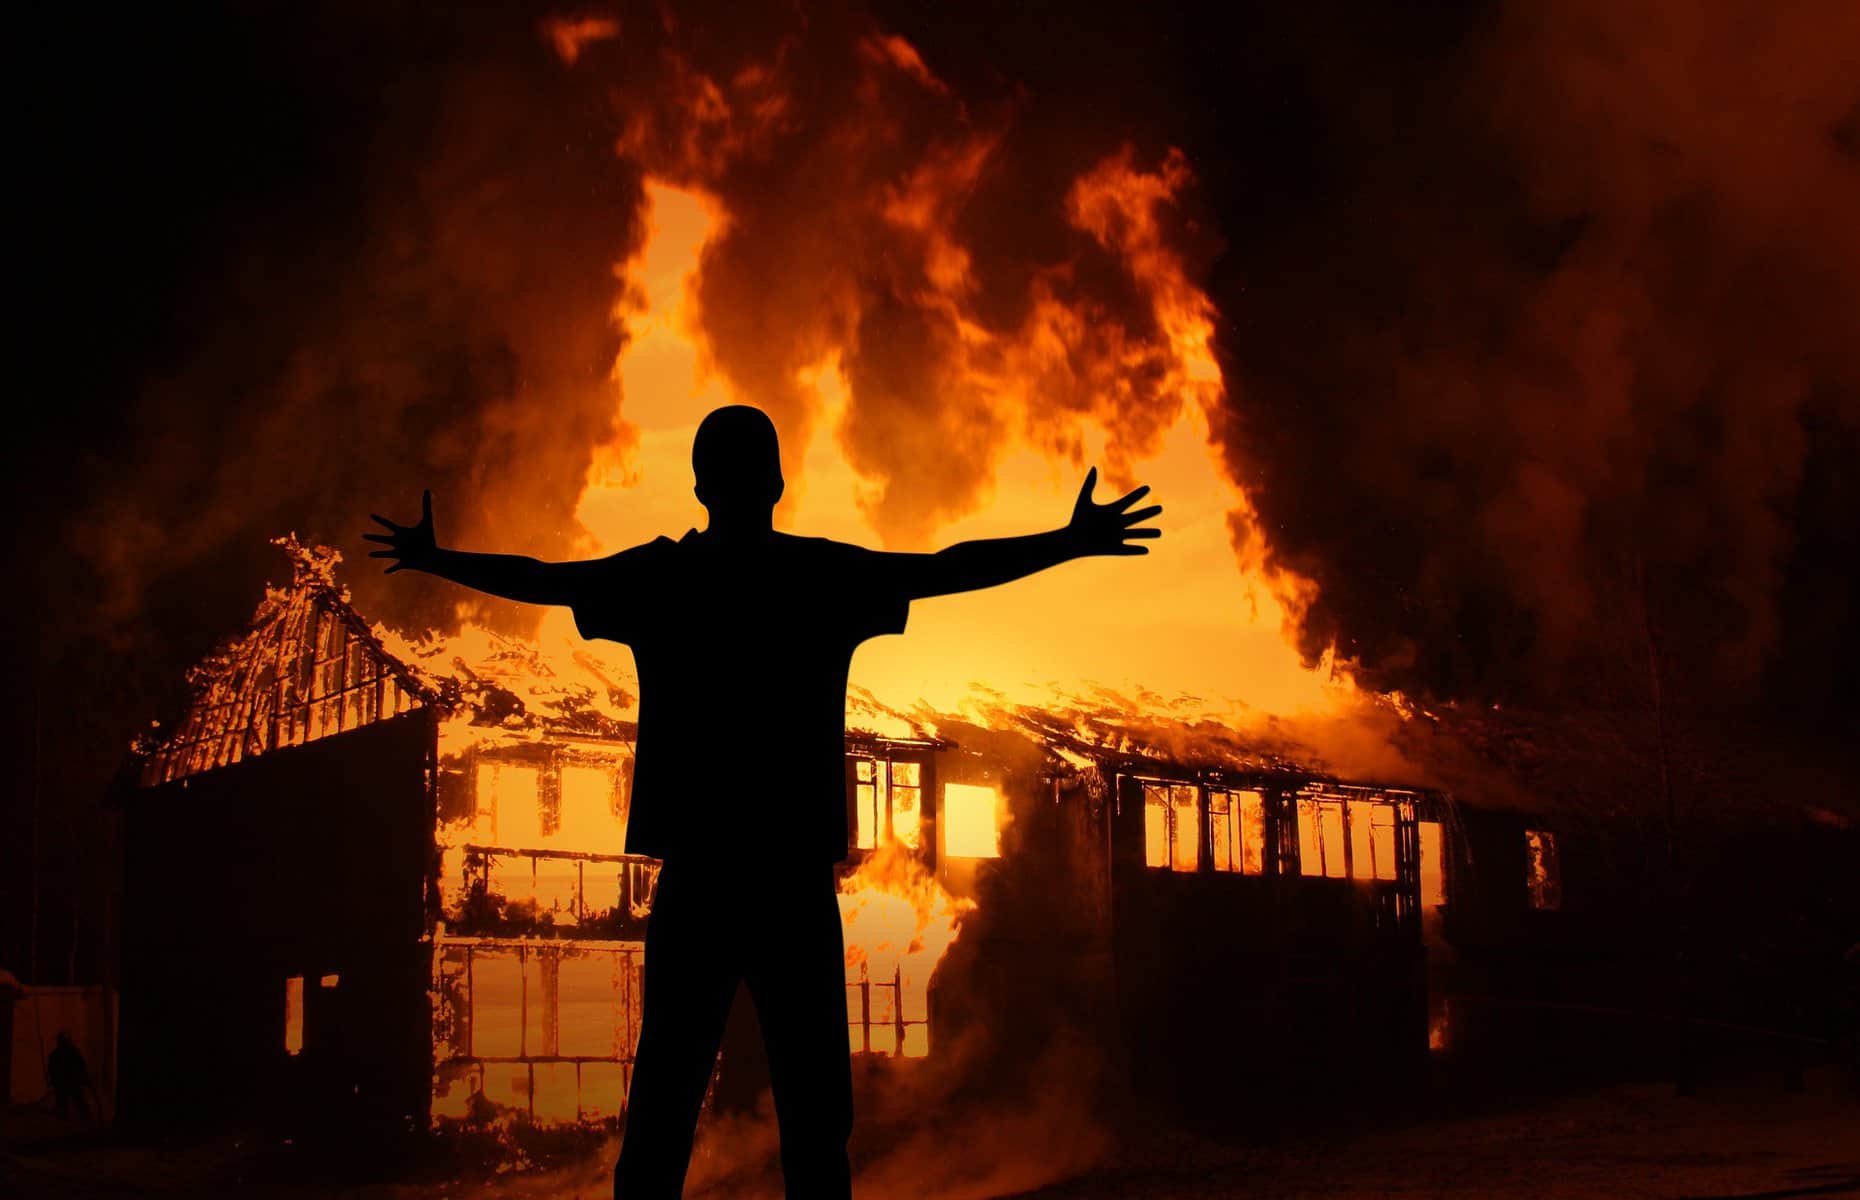 The silhouette of a person is shown in front of a blazing bonfire at night.